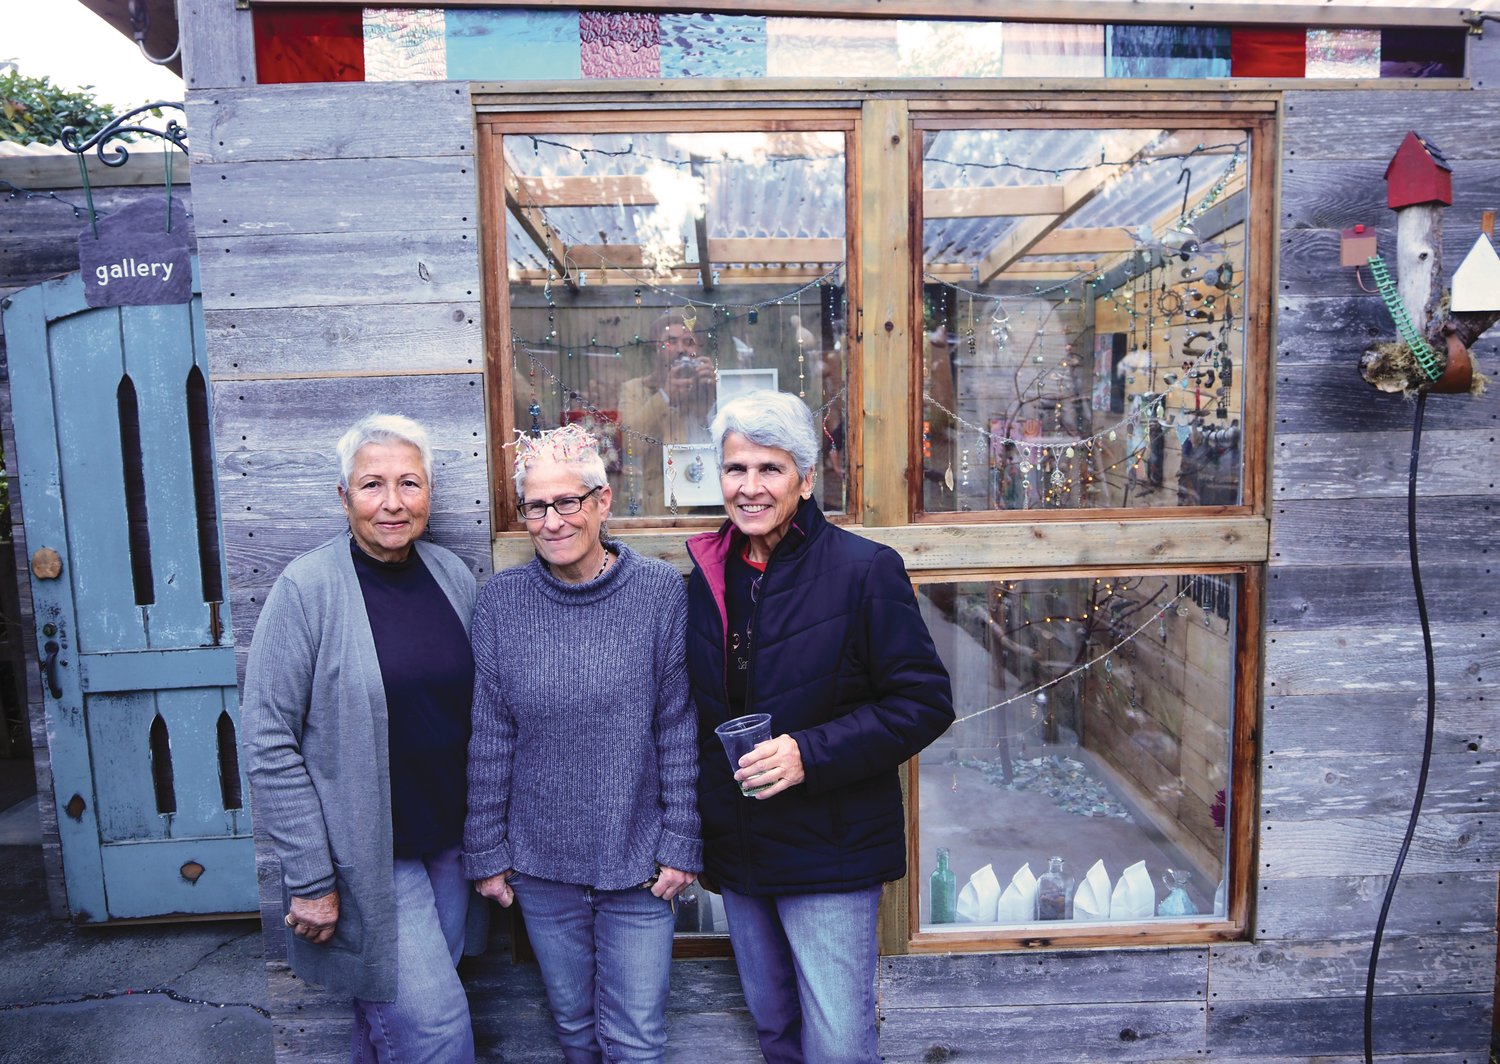 Carol Nicosia-Whelan, DJ Whelan, and Pat Nicosia are the mother, daughter, aunt team that built the gallery structure behind them to help build community in their new home.